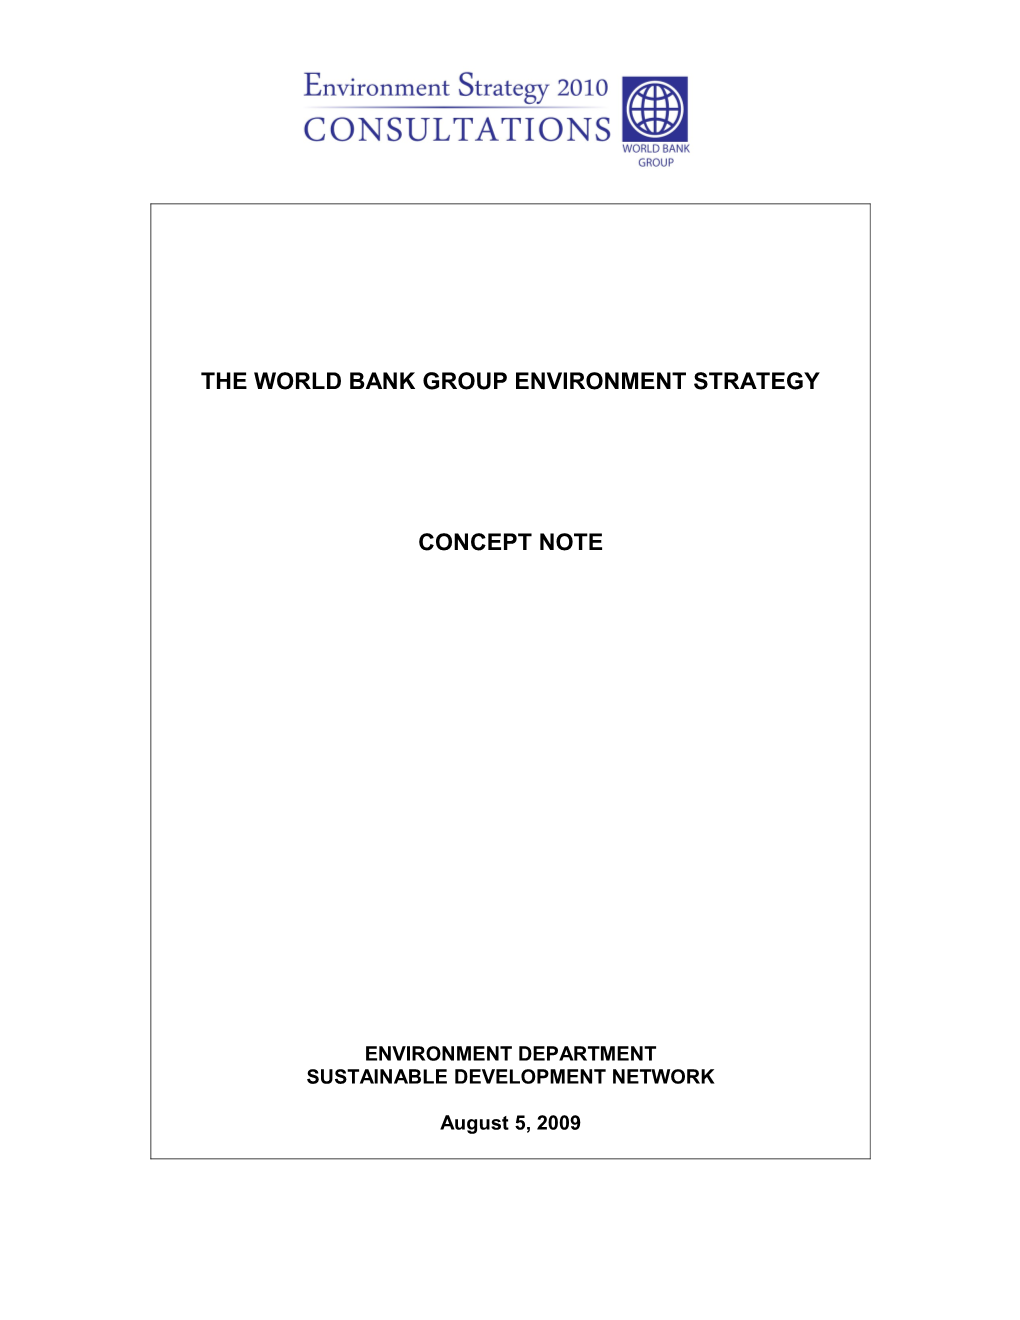 World Bank Group's Environment Strategy - Concept Note